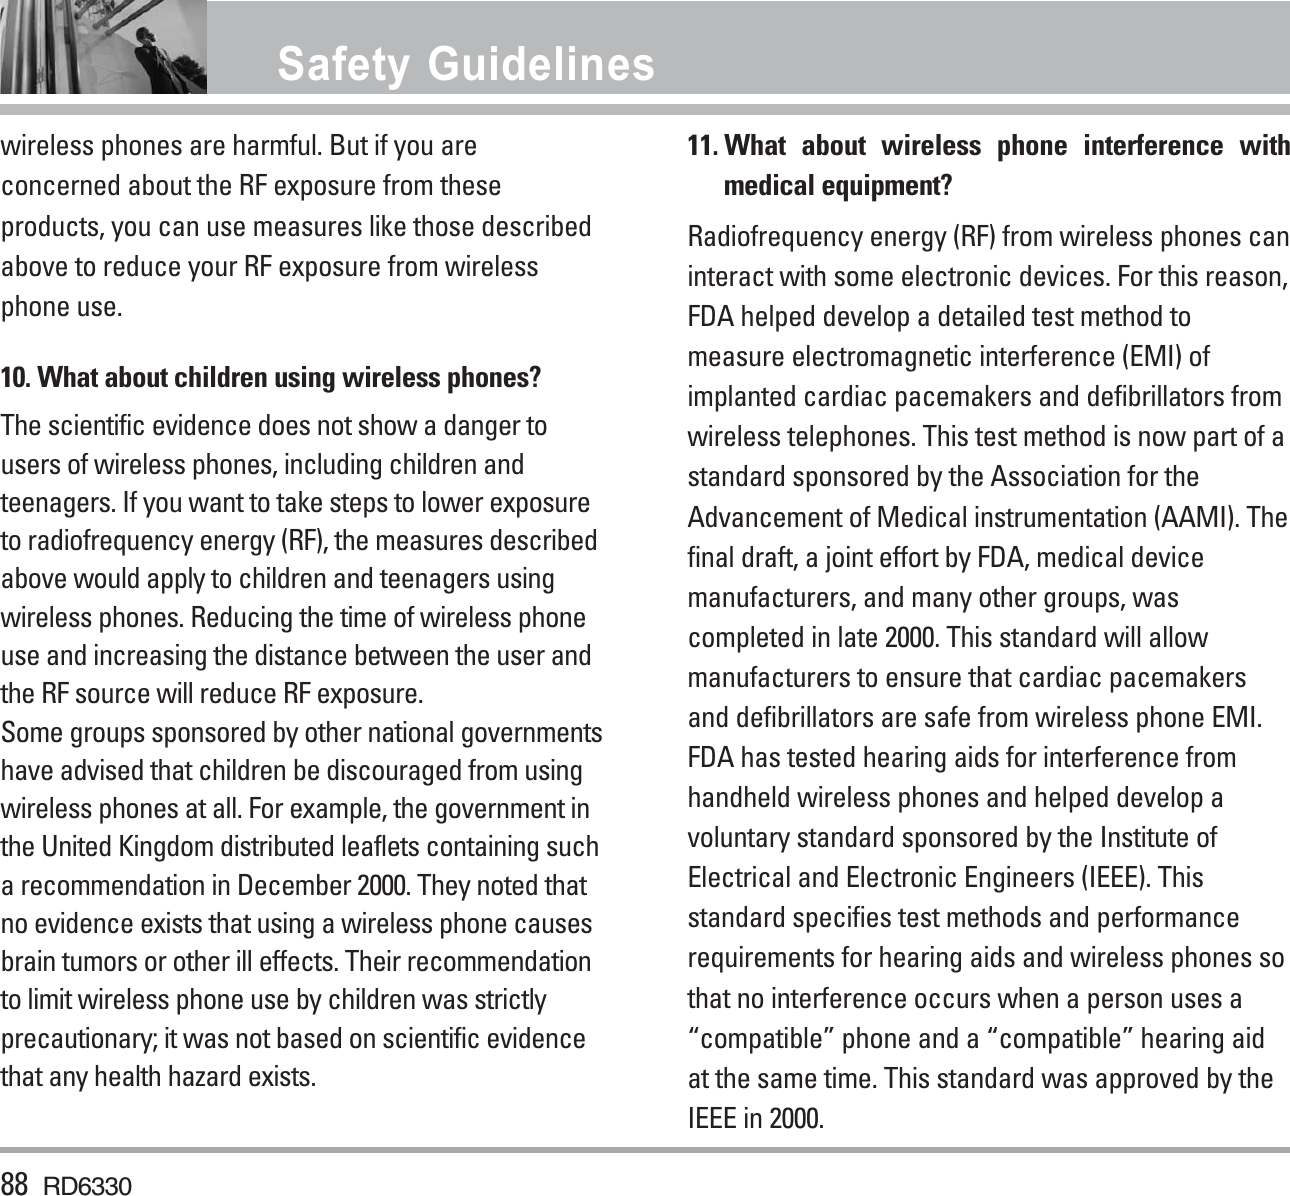 wireless phones are harmful. But if you areconcerned about the RF exposure from theseproducts, you can use measures like those describedabove to reduce your RF exposure from wirelessphone use.10. What about children using wireless phones?The scientific evidence does not show a danger tousers of wireless phones, including children andteenagers. If you want to take steps to lower exposureto radiofrequency energy (RF), the measures describedabove would apply to children and teenagers usingwireless phones. Reducing the time of wireless phoneuse and increasing the distance between the user andthe RF source will reduce RF exposure. Some groups sponsored by other national governmentshave advised that children be discouraged from usingwireless phones at all. For example, the government inthe United Kingdom distributed leaflets containing sucha recommendation in December 2000. They noted thatno evidence exists that using a wireless phone causesbrain tumors or other ill effects. Their recommendationto limit wireless phone use by children was strictlyprecautionary; it was not based on scientific evidencethat any health hazard exists.11. What about wireless phone interference withmedical equipment?Radiofrequency energy (RF) from wireless phones caninteract with some electronic devices. For this reason,FDA helped develop a detailed test method tomeasure electromagnetic interference (EMI) ofimplanted cardiac pacemakers and defibrillators fromwireless telephones. This test method is now part of astandard sponsored by the Association for theAdvancement of Medical instrumentation (AAMI). Thefinal draft, a joint effort by FDA, medical devicemanufacturers, and many other groups, wascompleted in late 2000. This standard will allowmanufacturers to ensure that cardiac pacemakersand defibrillators are safe from wireless phone EMI.FDA has tested hearing aids for interference fromhandheld wireless phones and helped develop avoluntary standard sponsored by the Institute ofElectrical and Electronic Engineers (IEEE). Thisstandard specifies test methods and performancerequirements for hearing aids and wireless phones sothat no interference occurs when a person uses a“compatible” phone and a “compatible” hearing aidat the same time. This standard was approved by theIEEE in 2000. 88 RD6330Safety Guidelines